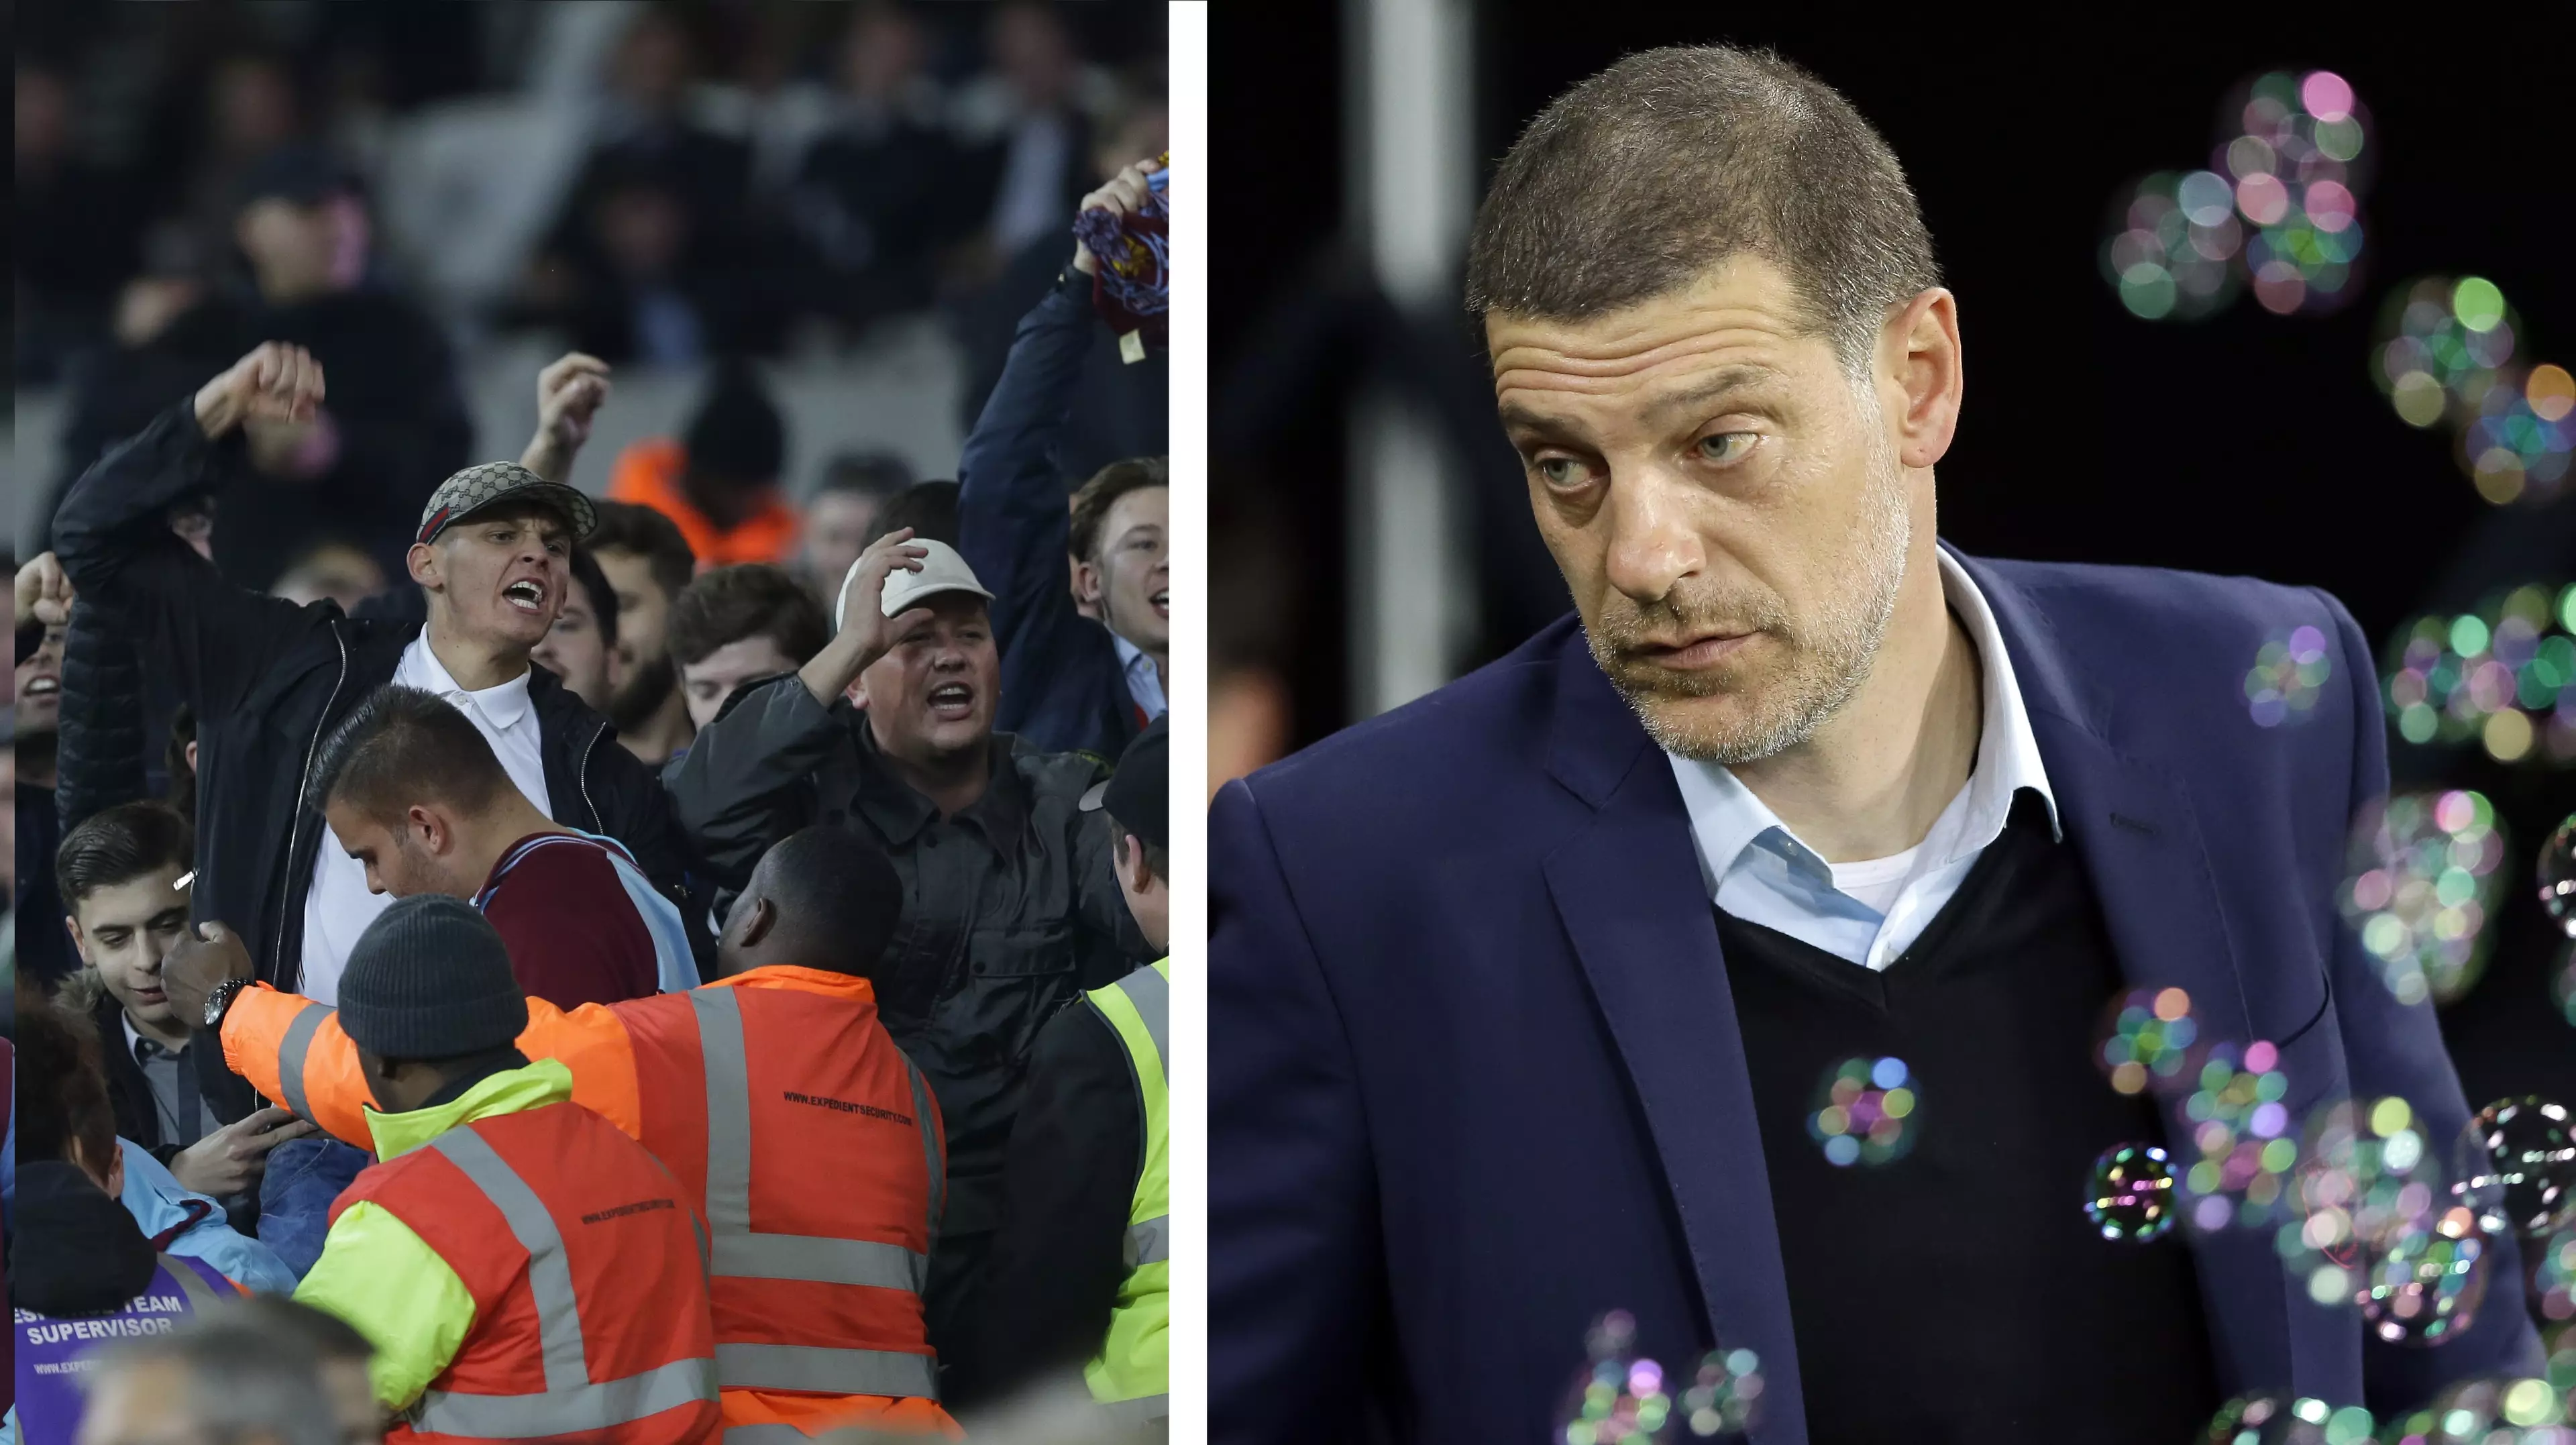 Bilic Decries Fans After Violence In Stands Overshadows West Ham Win